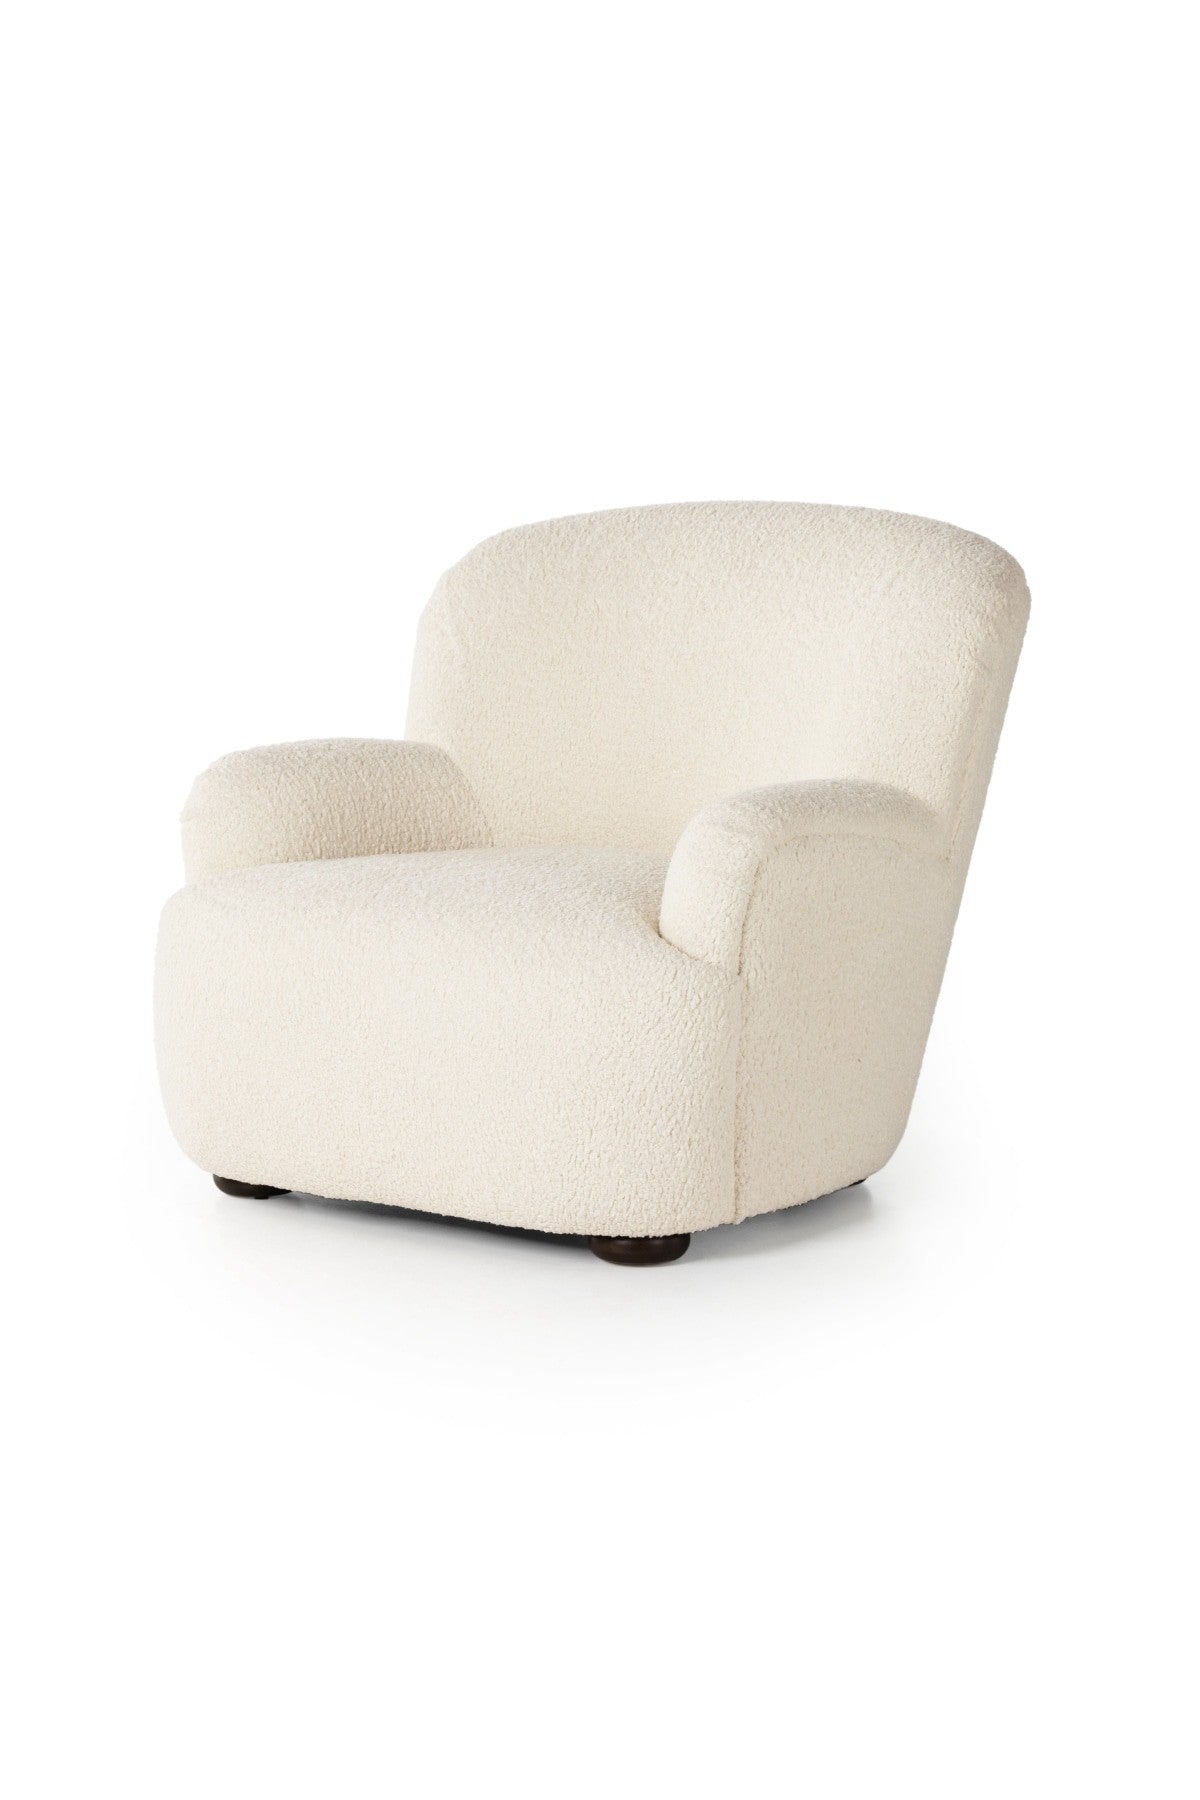 Stellina Chair - 2 Colors